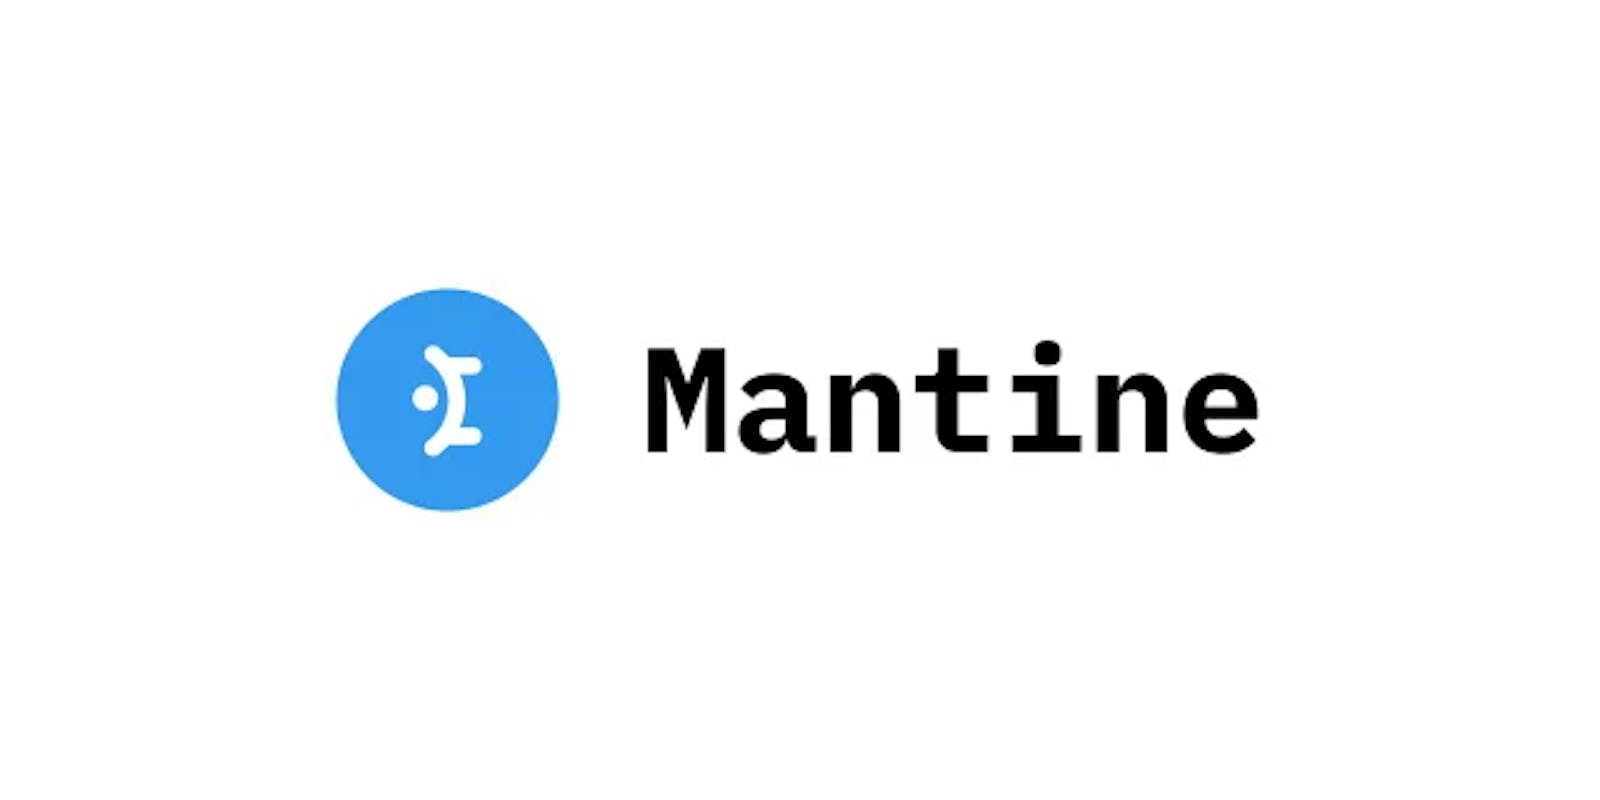 Getting started with Mantine and why you should use it.